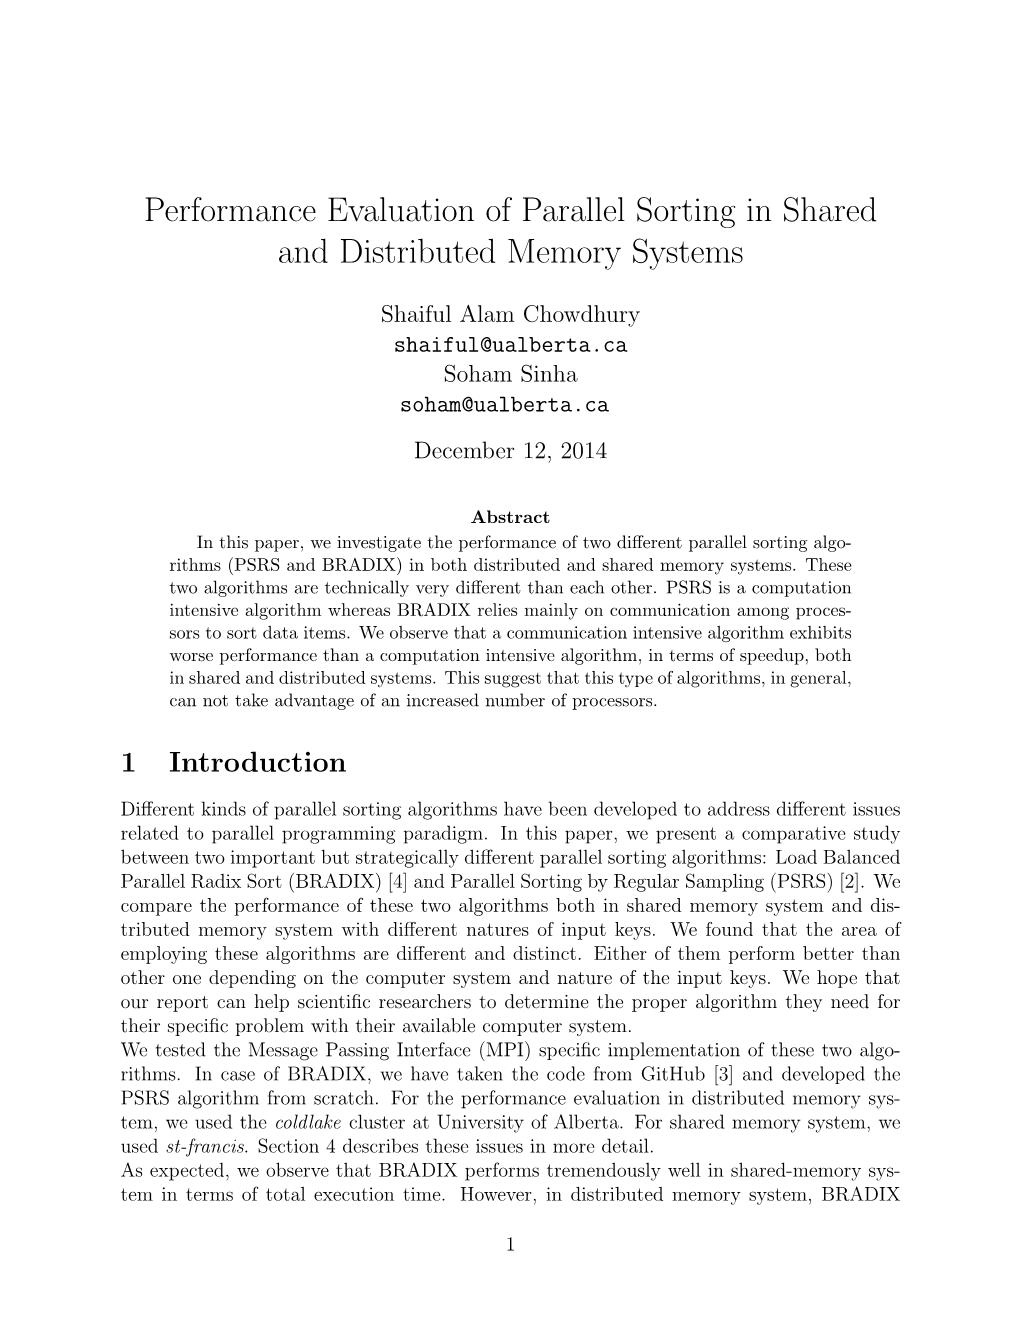 Performance Evaluation of Parallel Sorting in Shared and Distributed Memory Systems